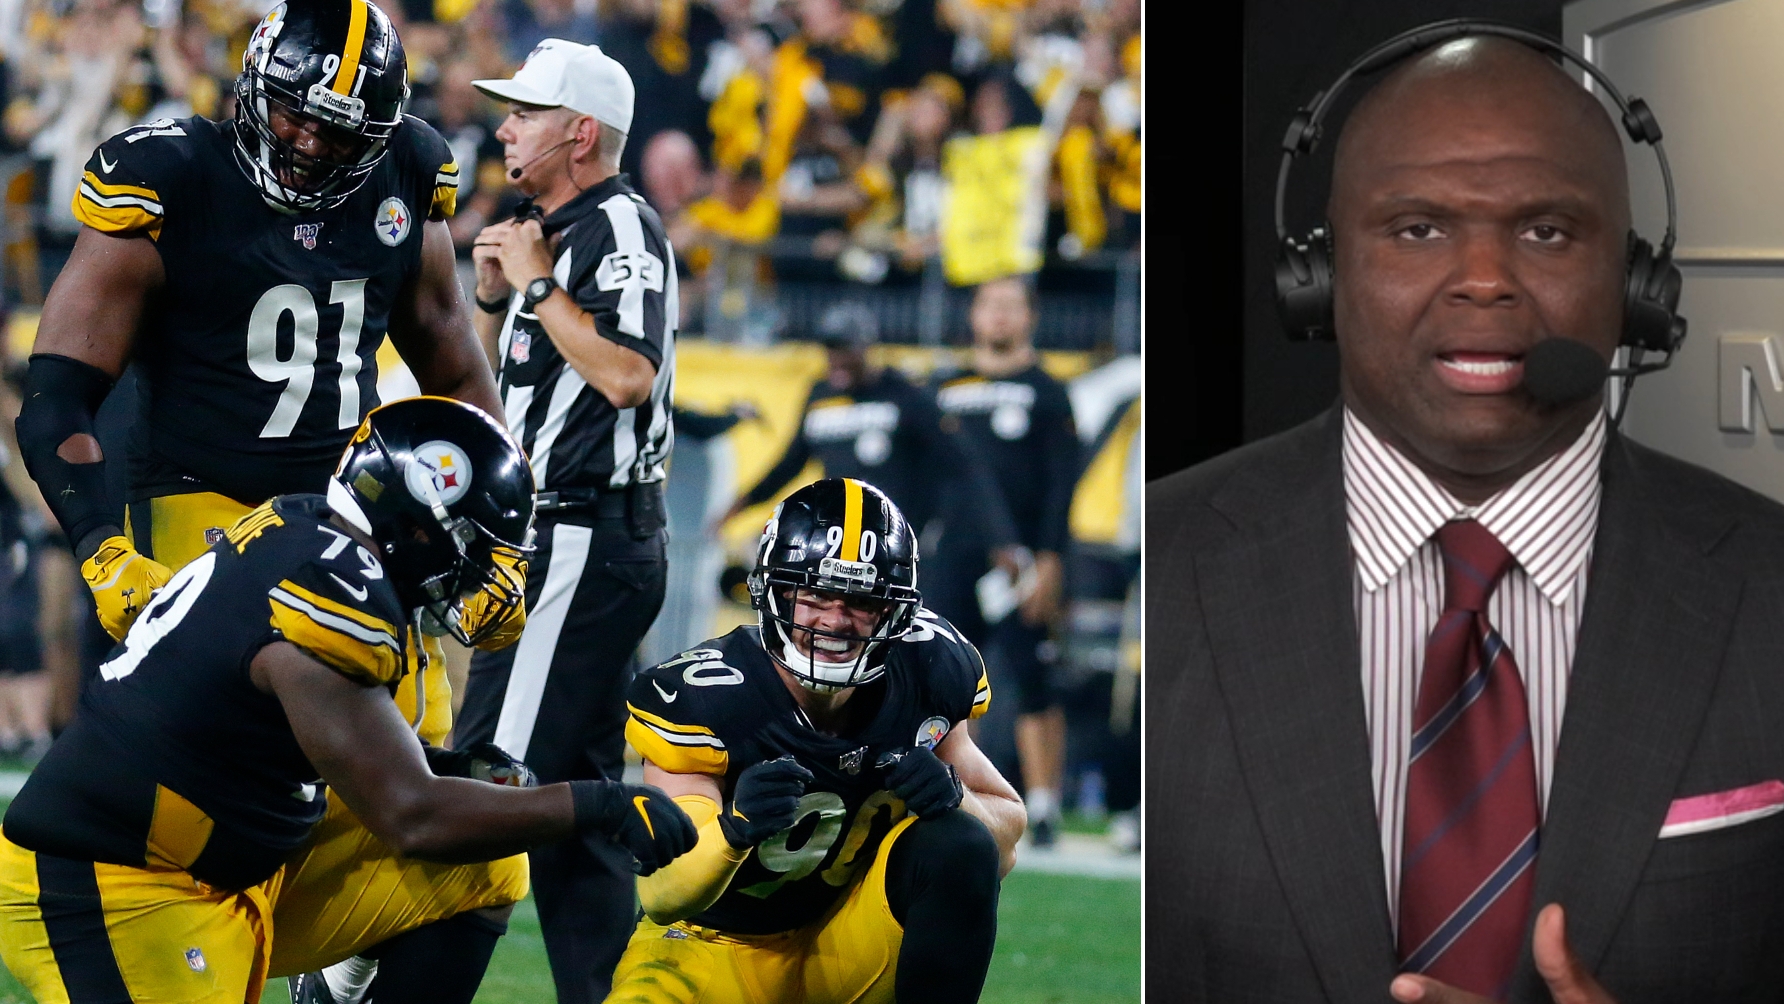 Booger high on Steelers defense in win - Stream the Video - Watch ESPN